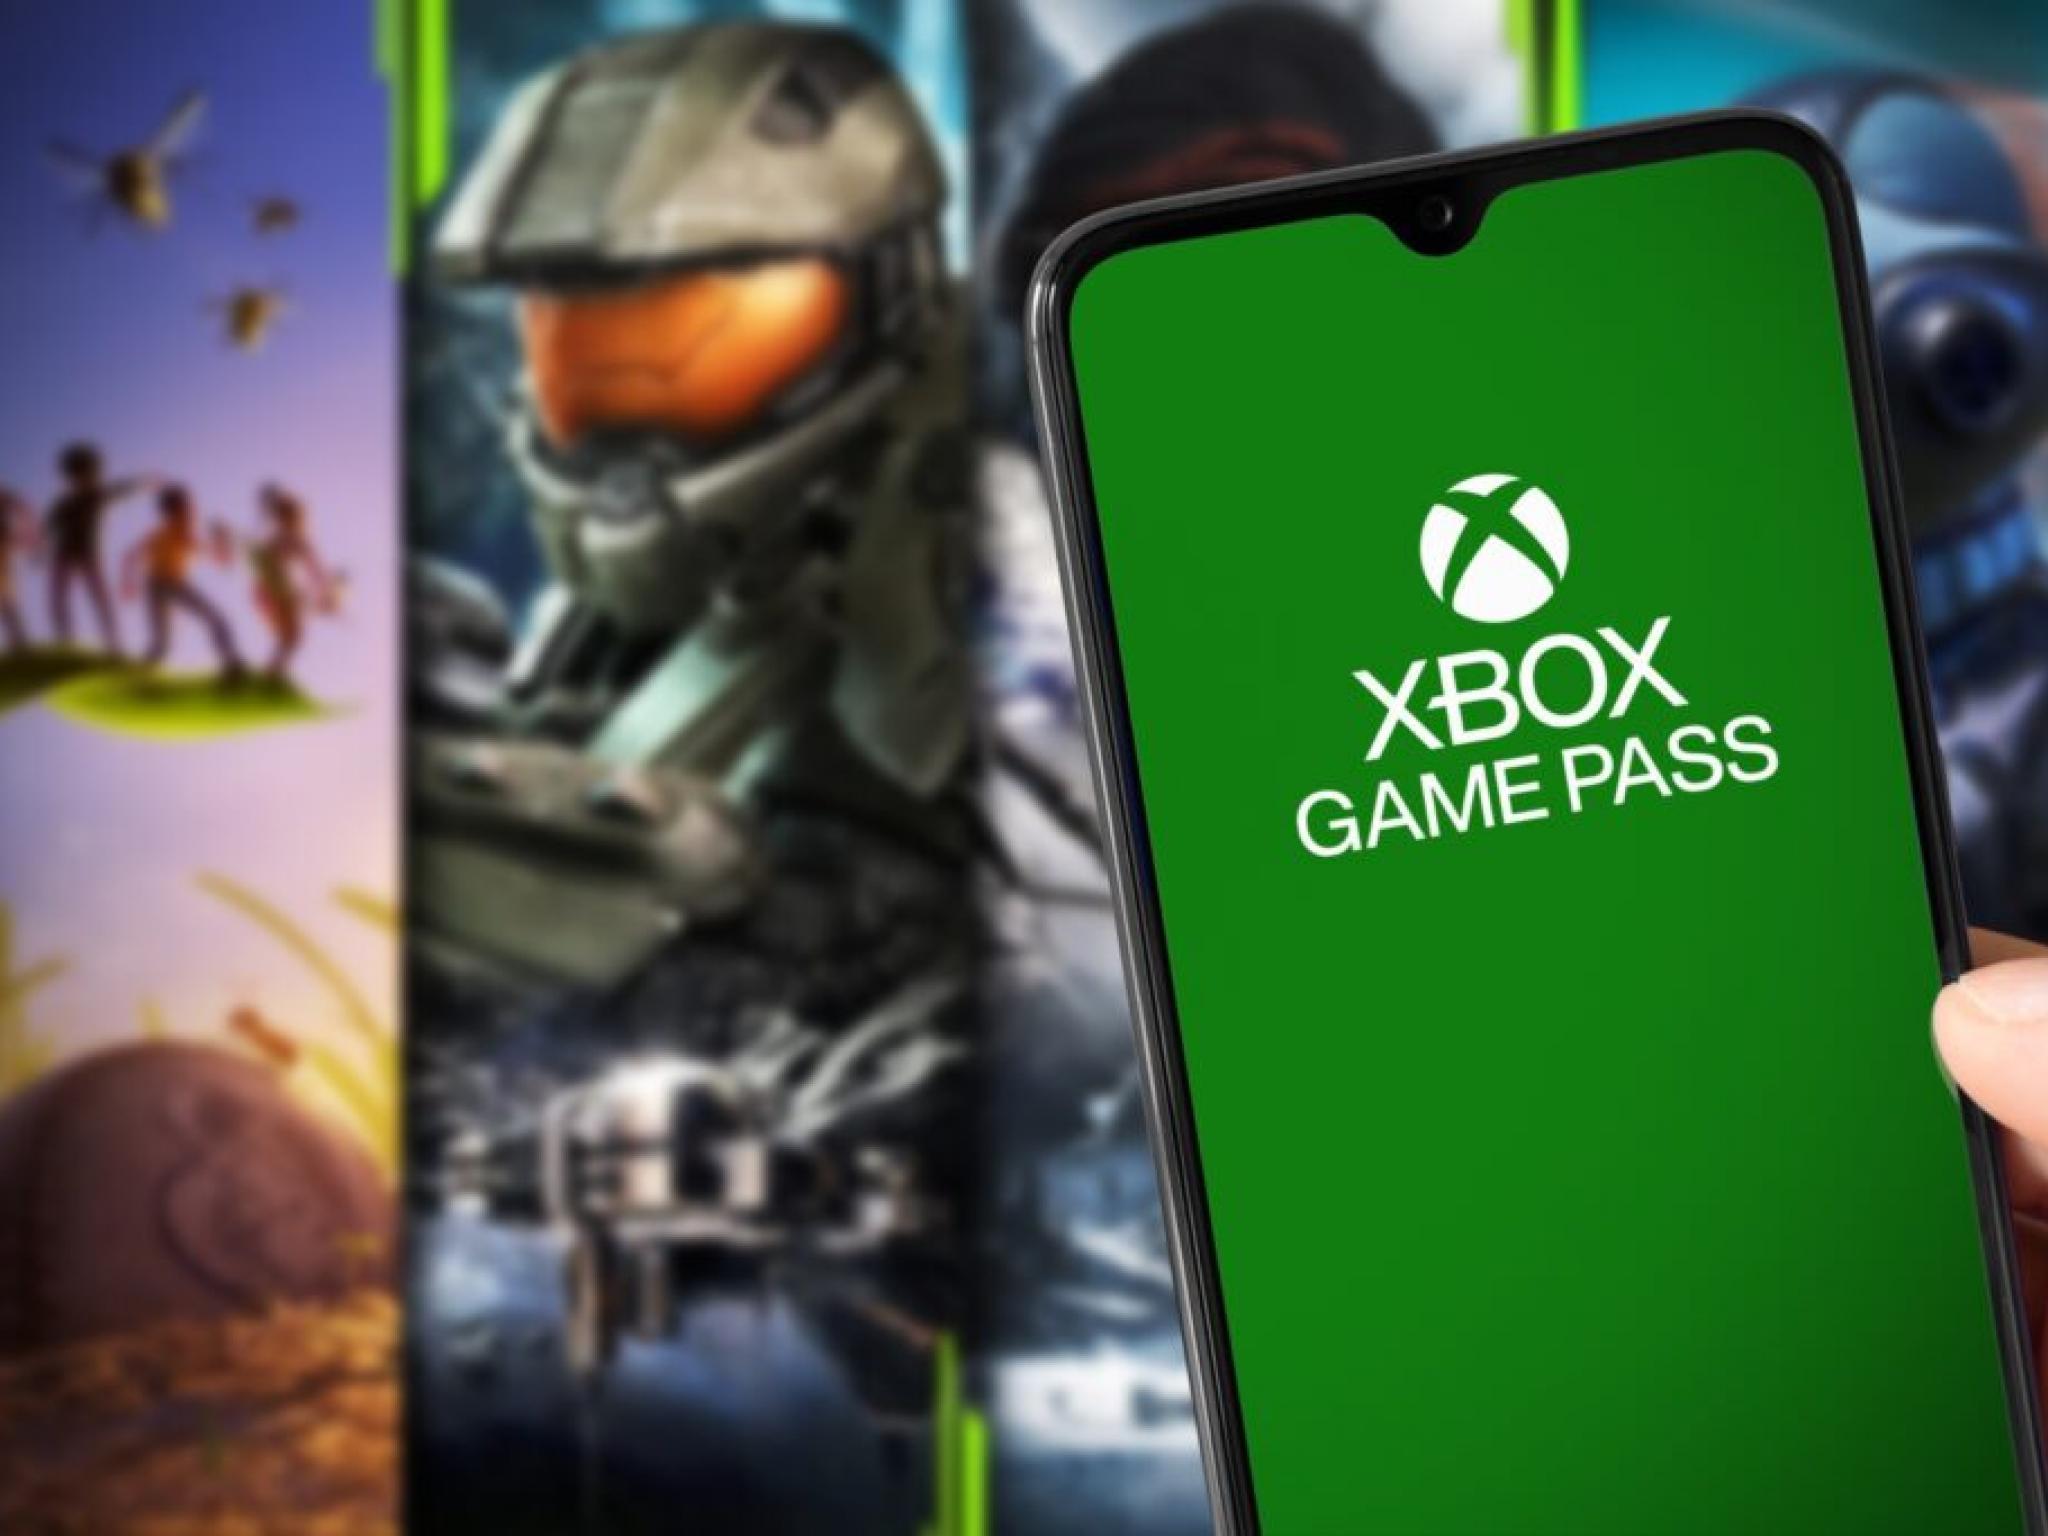  ftc-criticizes-microsoft-over-xbox-game-pass-price-increase-and-degraded-standard-tier-updated 